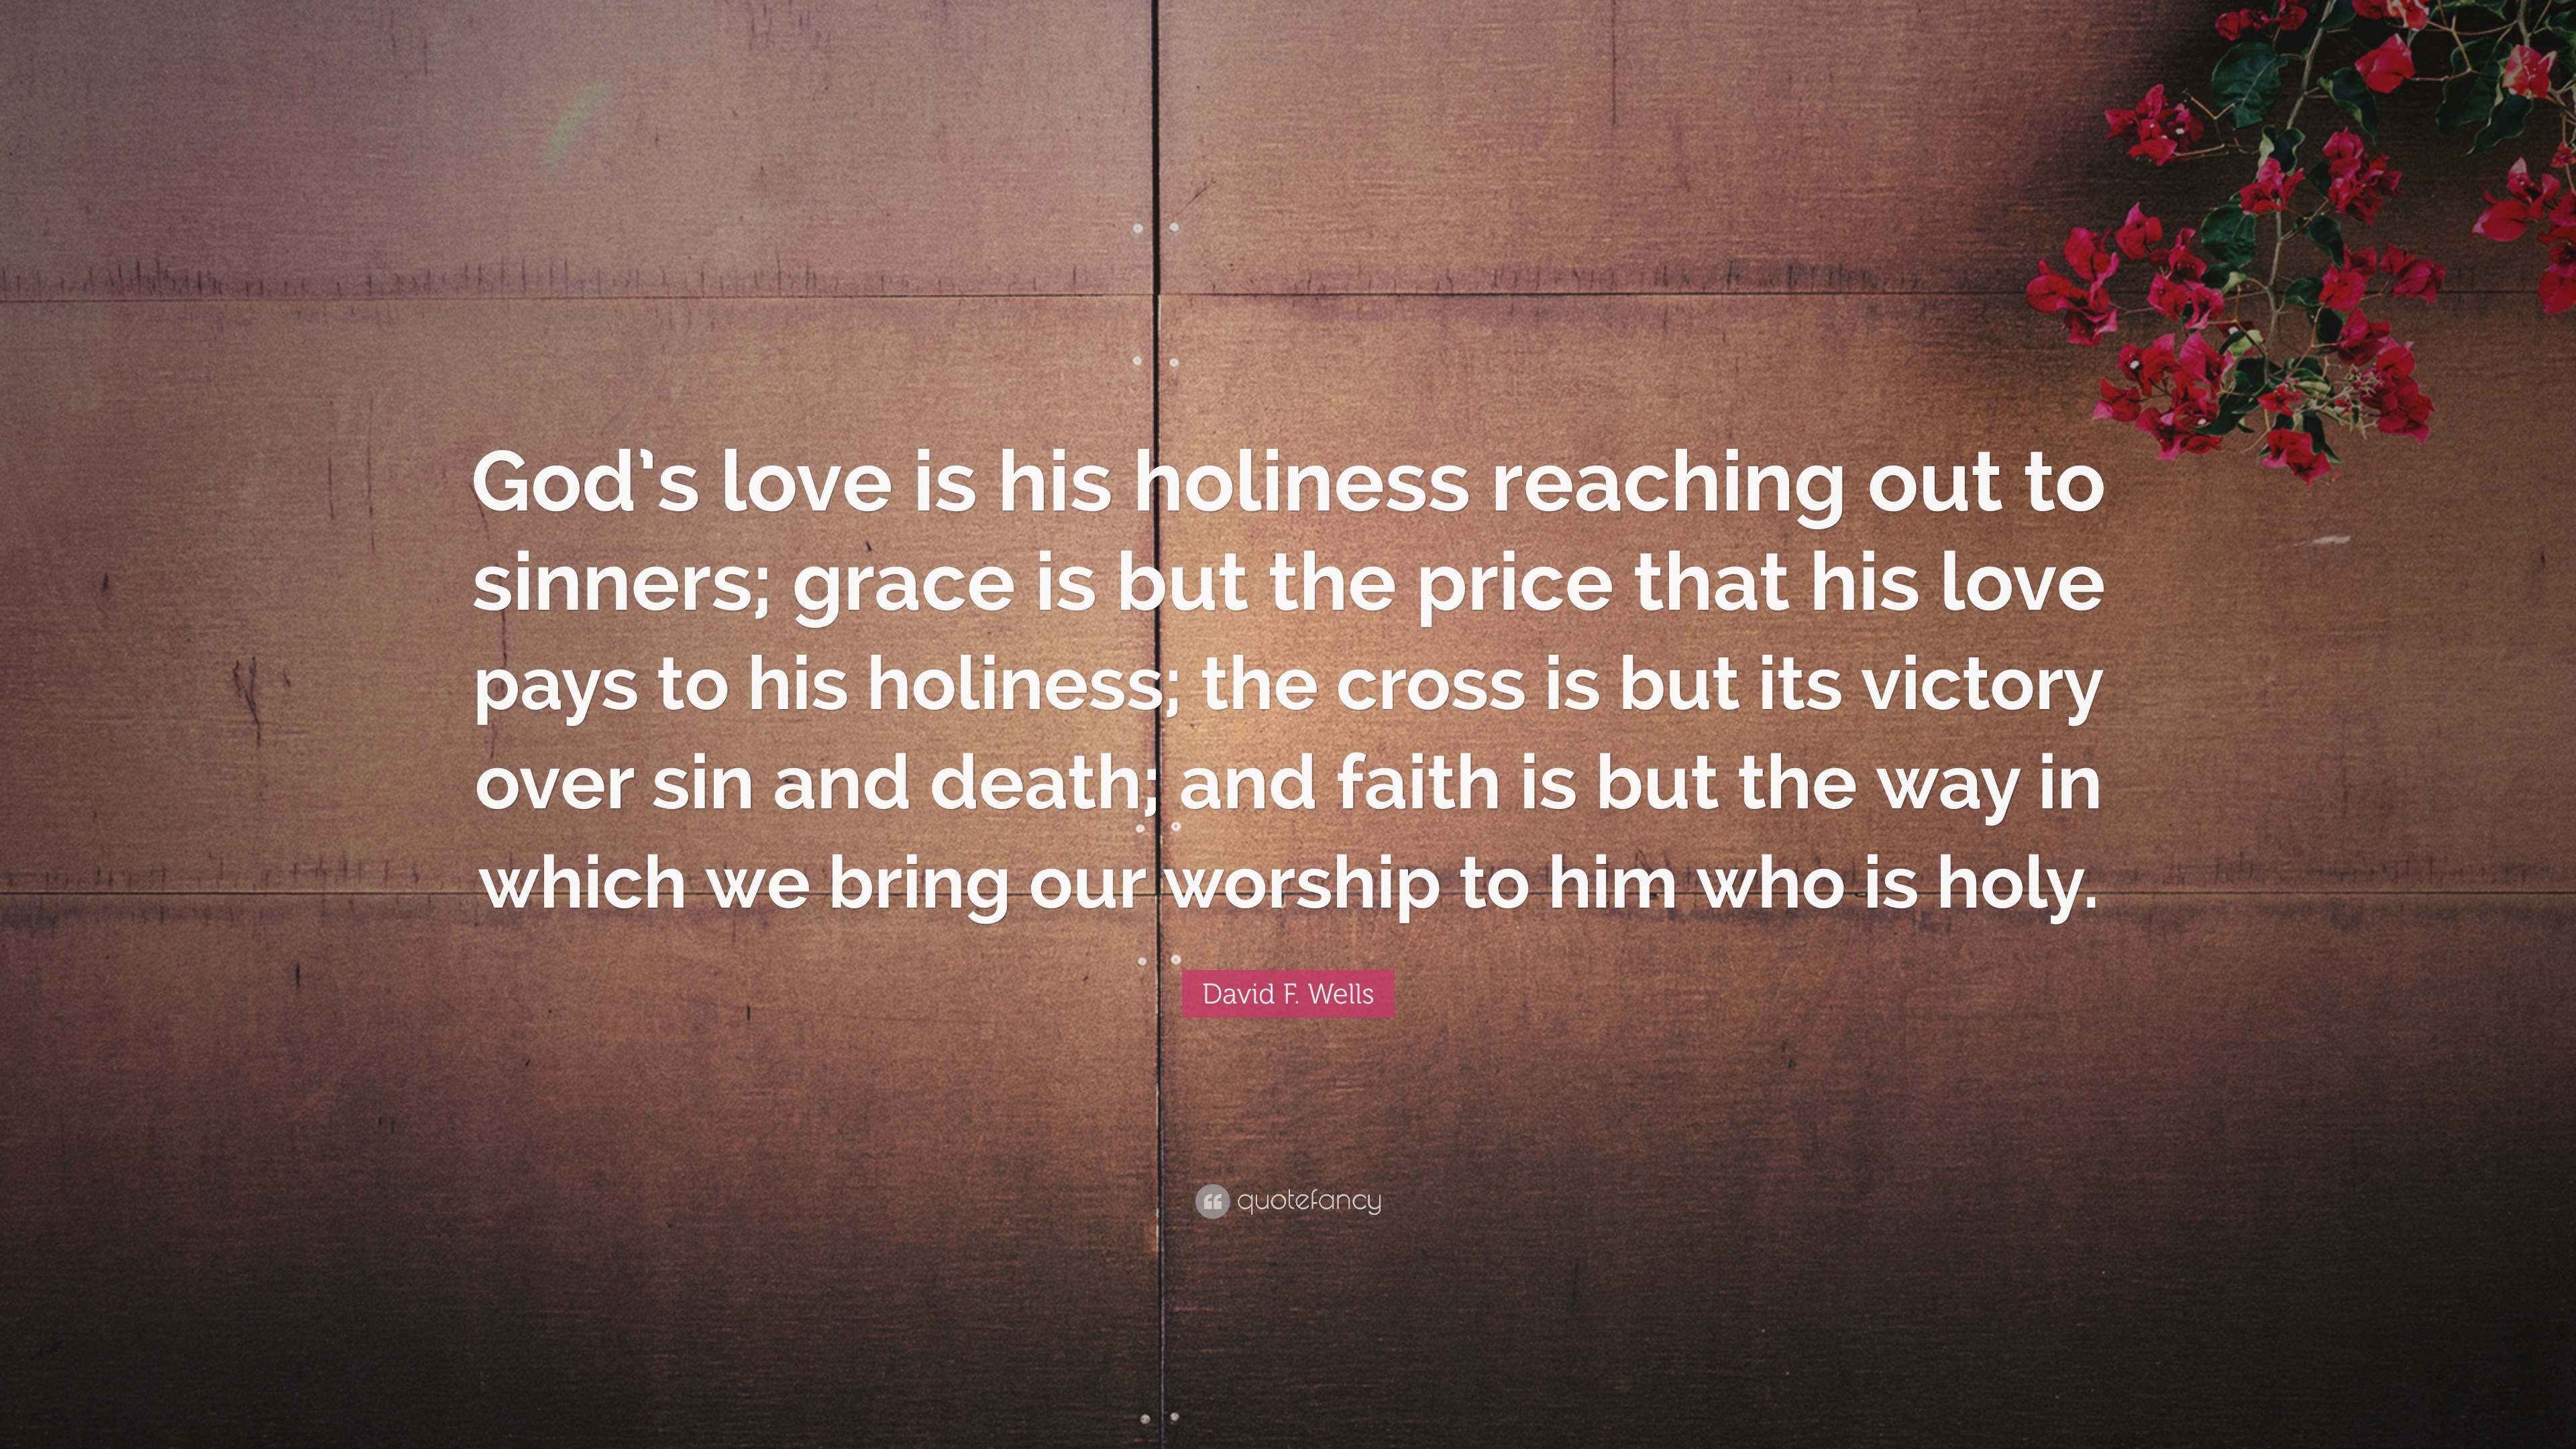 David F Wells Quote “God s love is his holiness reaching out to sinners